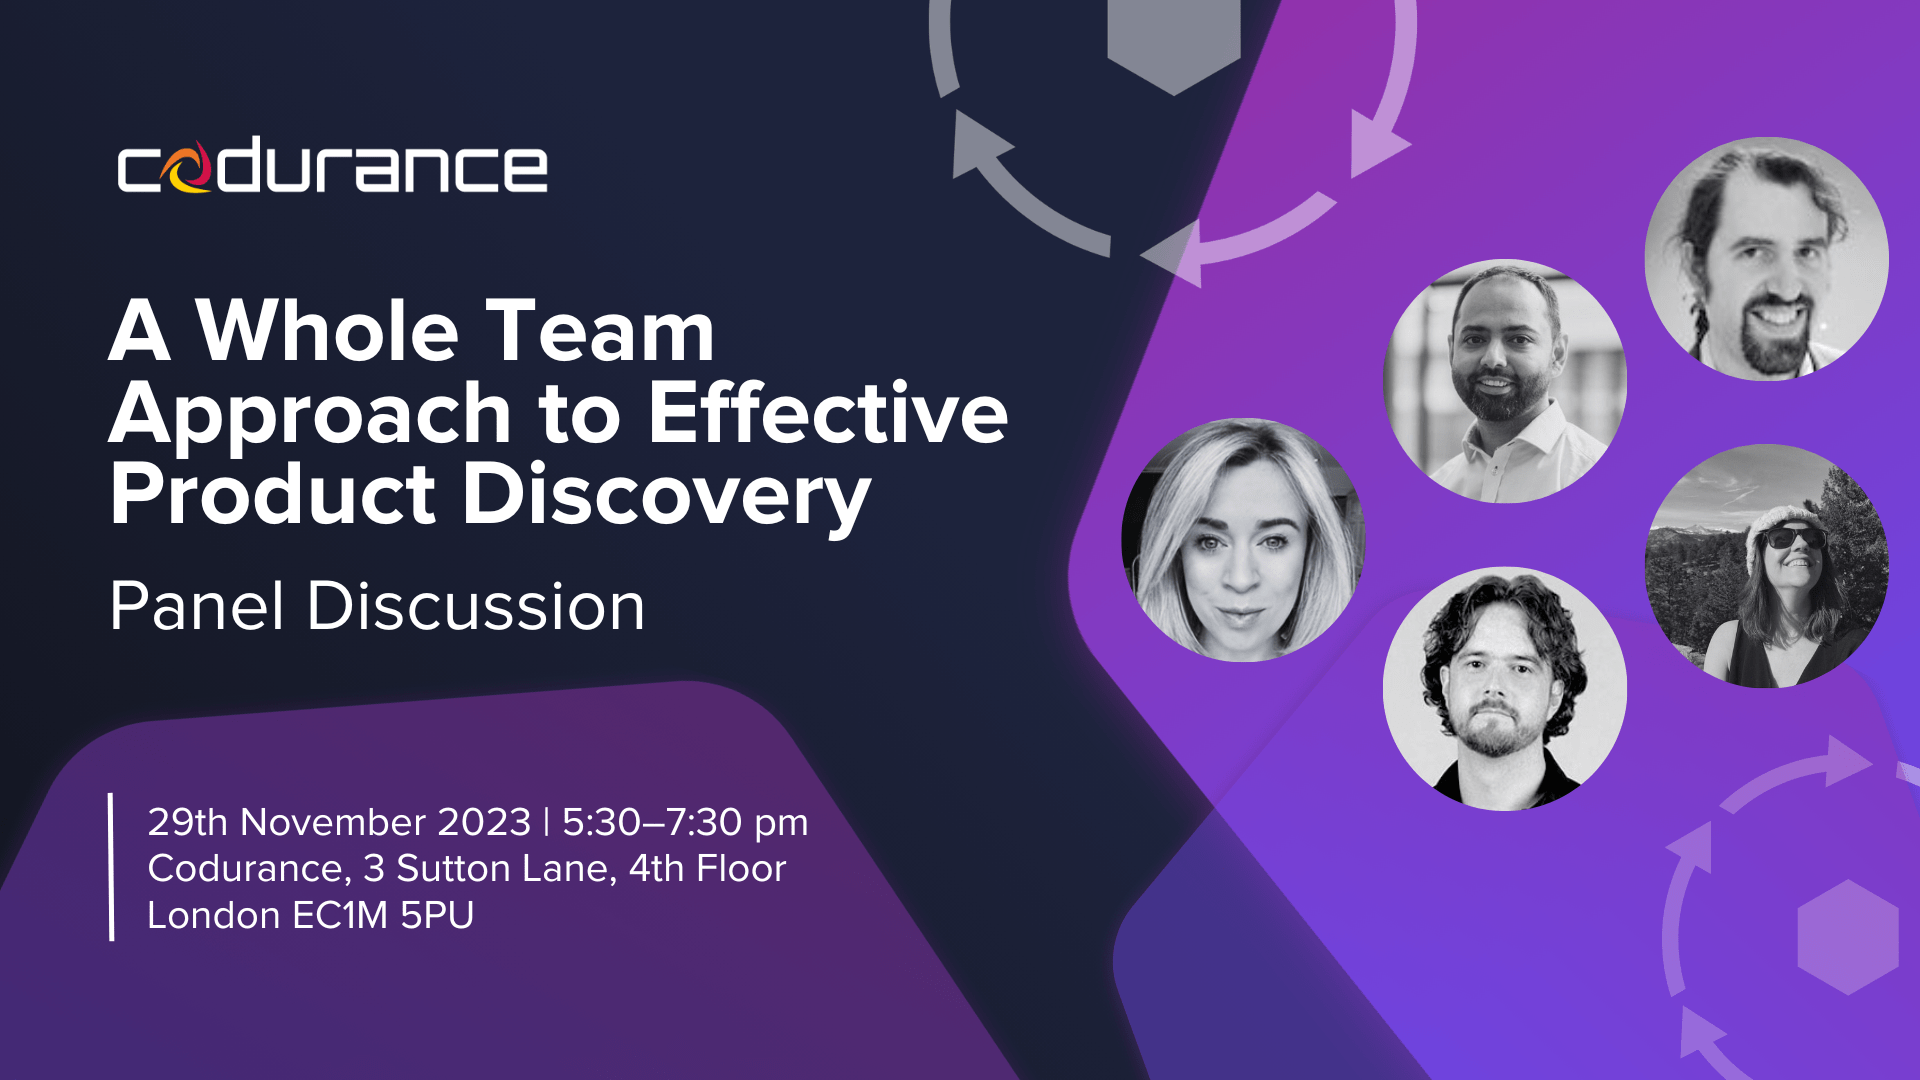 A whole team approach to effective product discovery